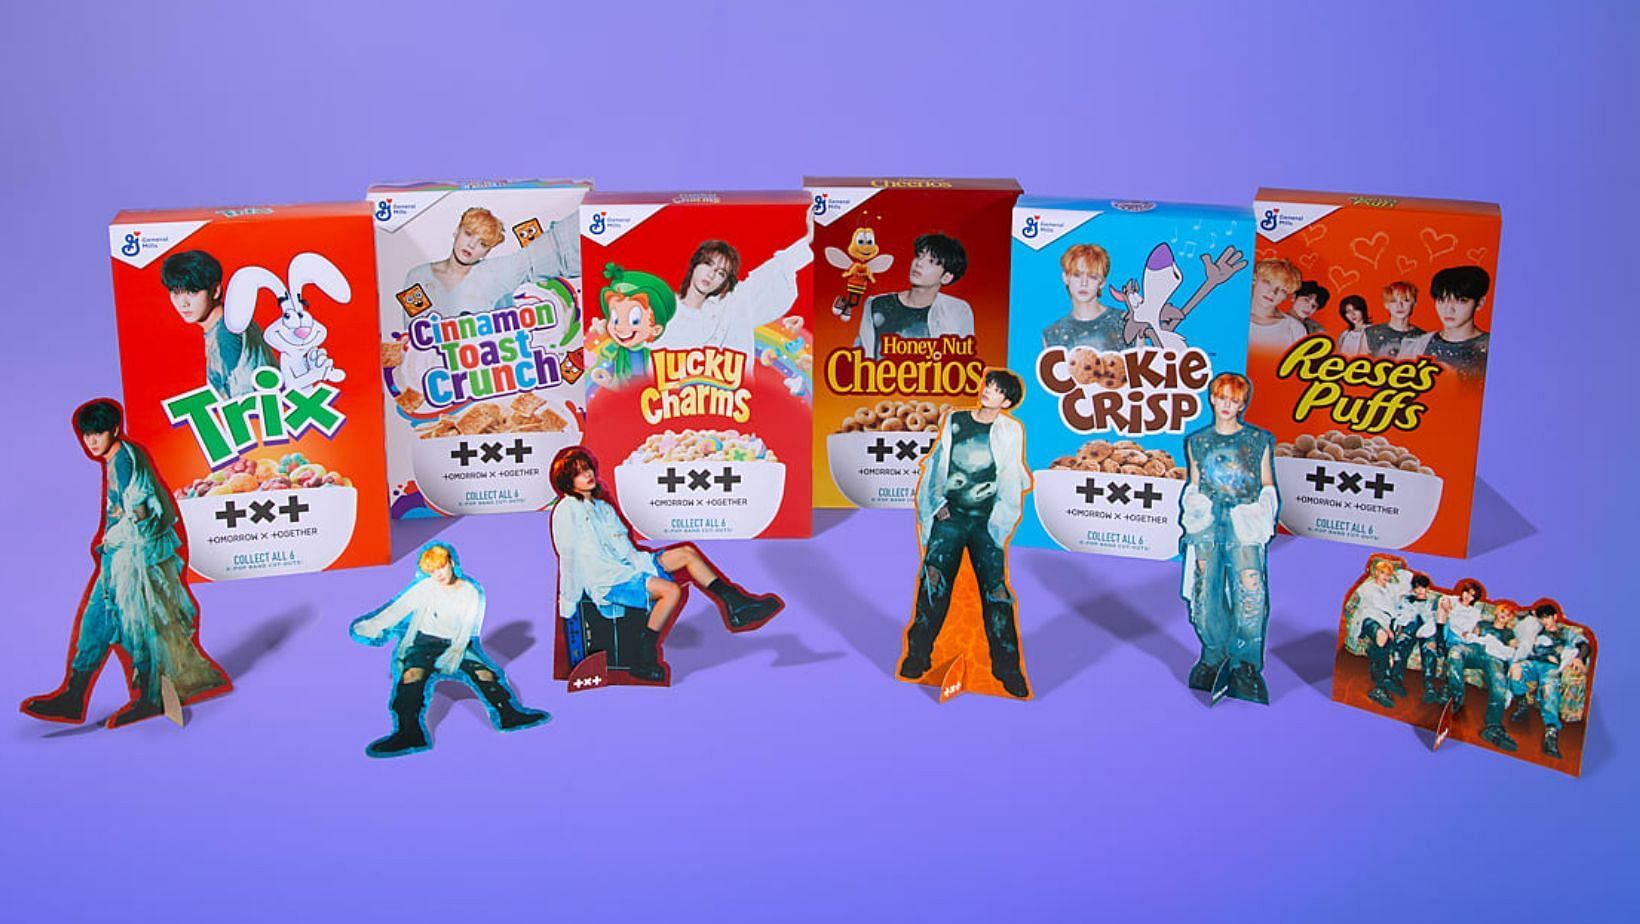 TXT collaborates with General Mills for a set of special-edition cereal boxes like Reese